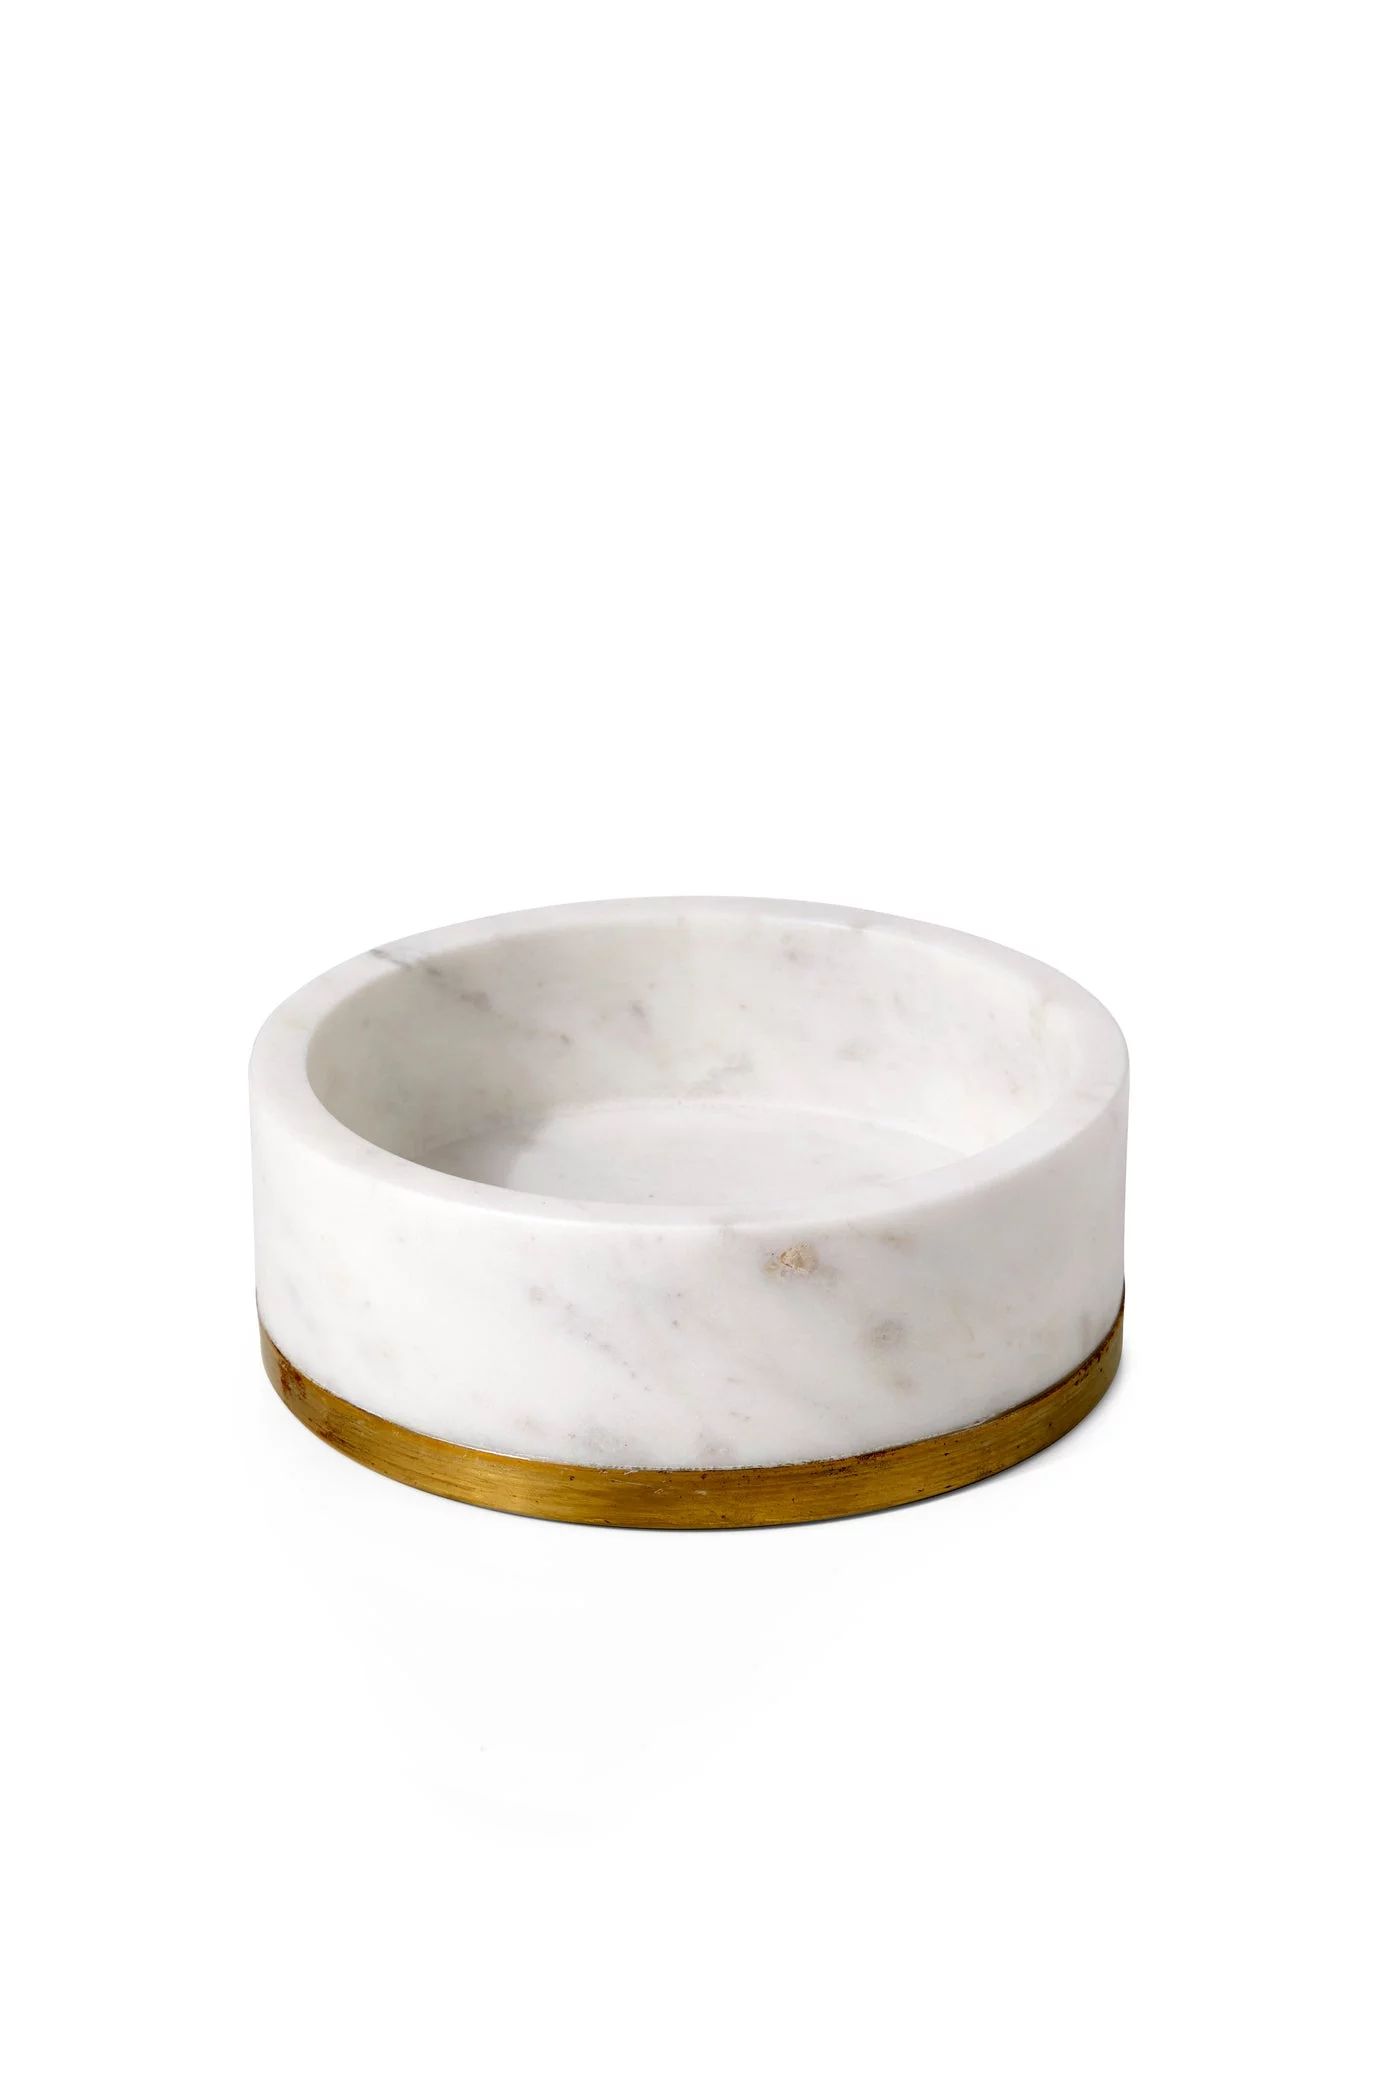 Serene Spaces Living White Marble Bowl with Brass Ring, Decorative Multi-Purpose Bowl- Use as Cen... | Walmart (US)